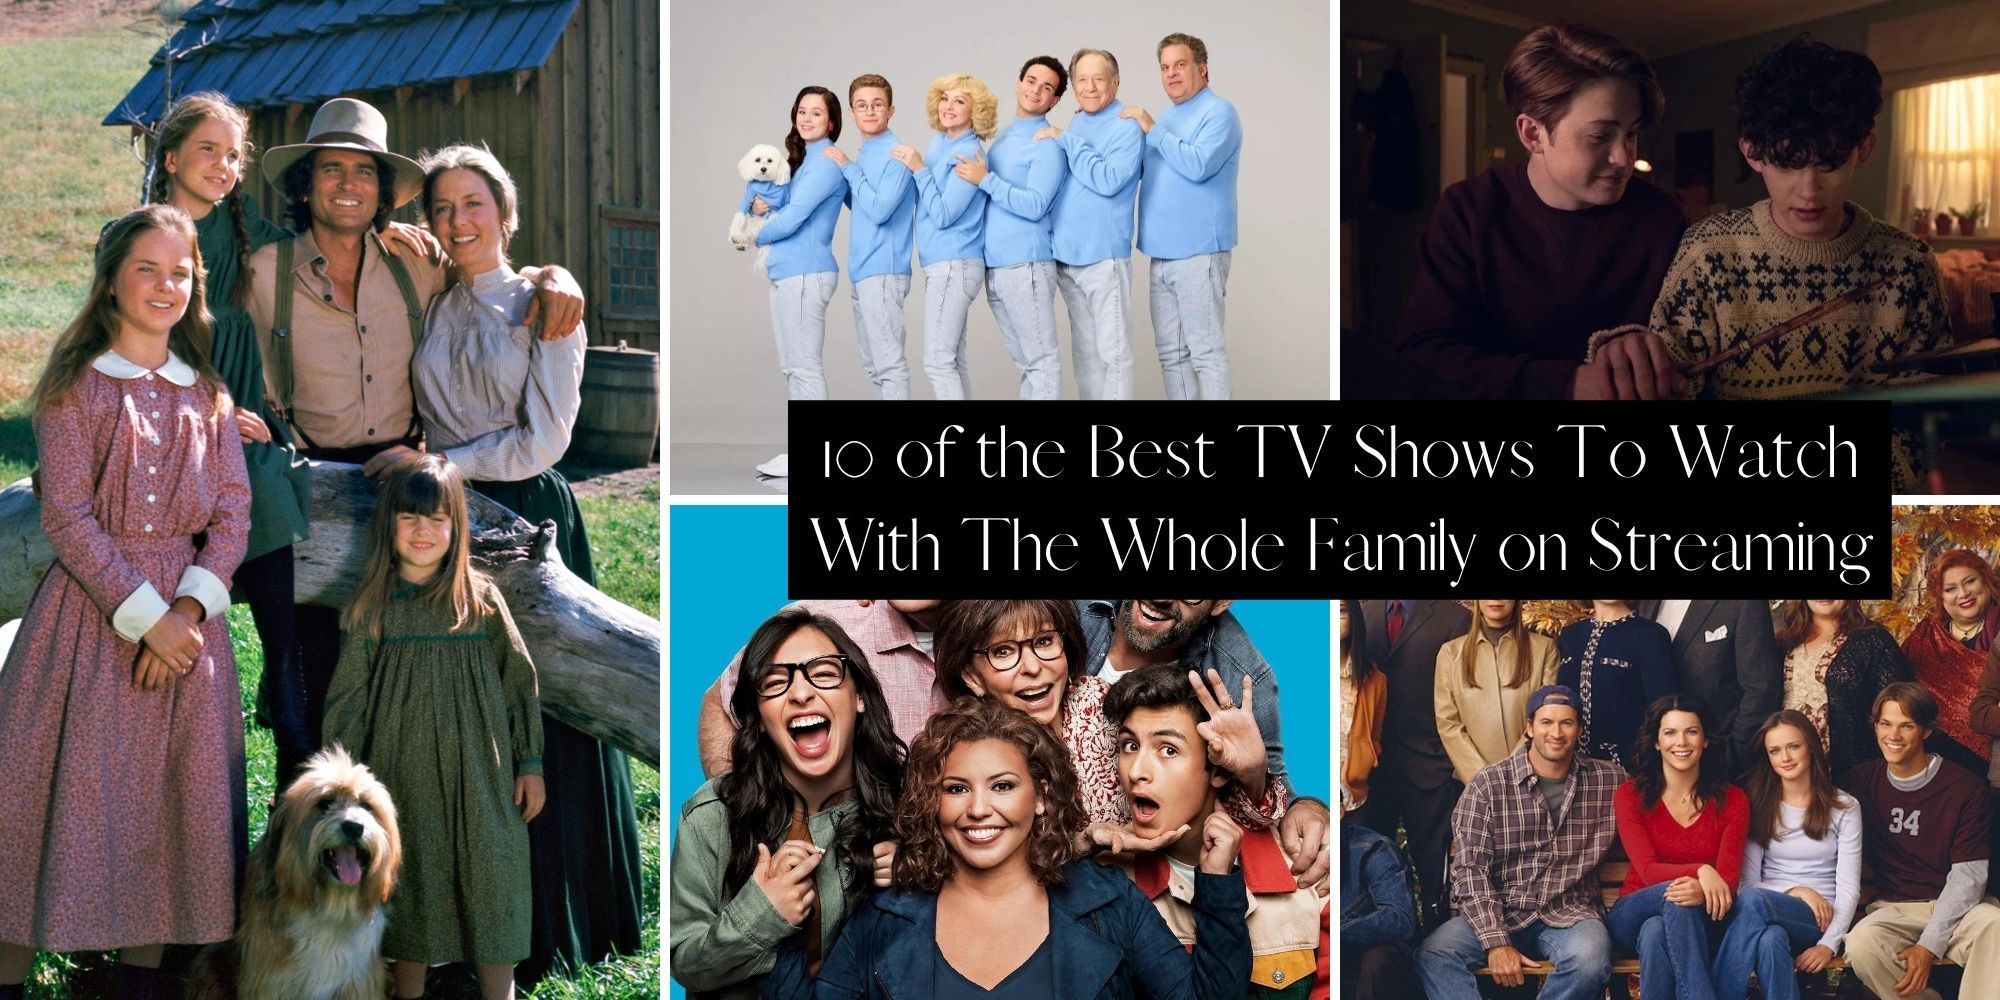 10 of the Best TV Shows To Watch With The Whole Family on Streaming